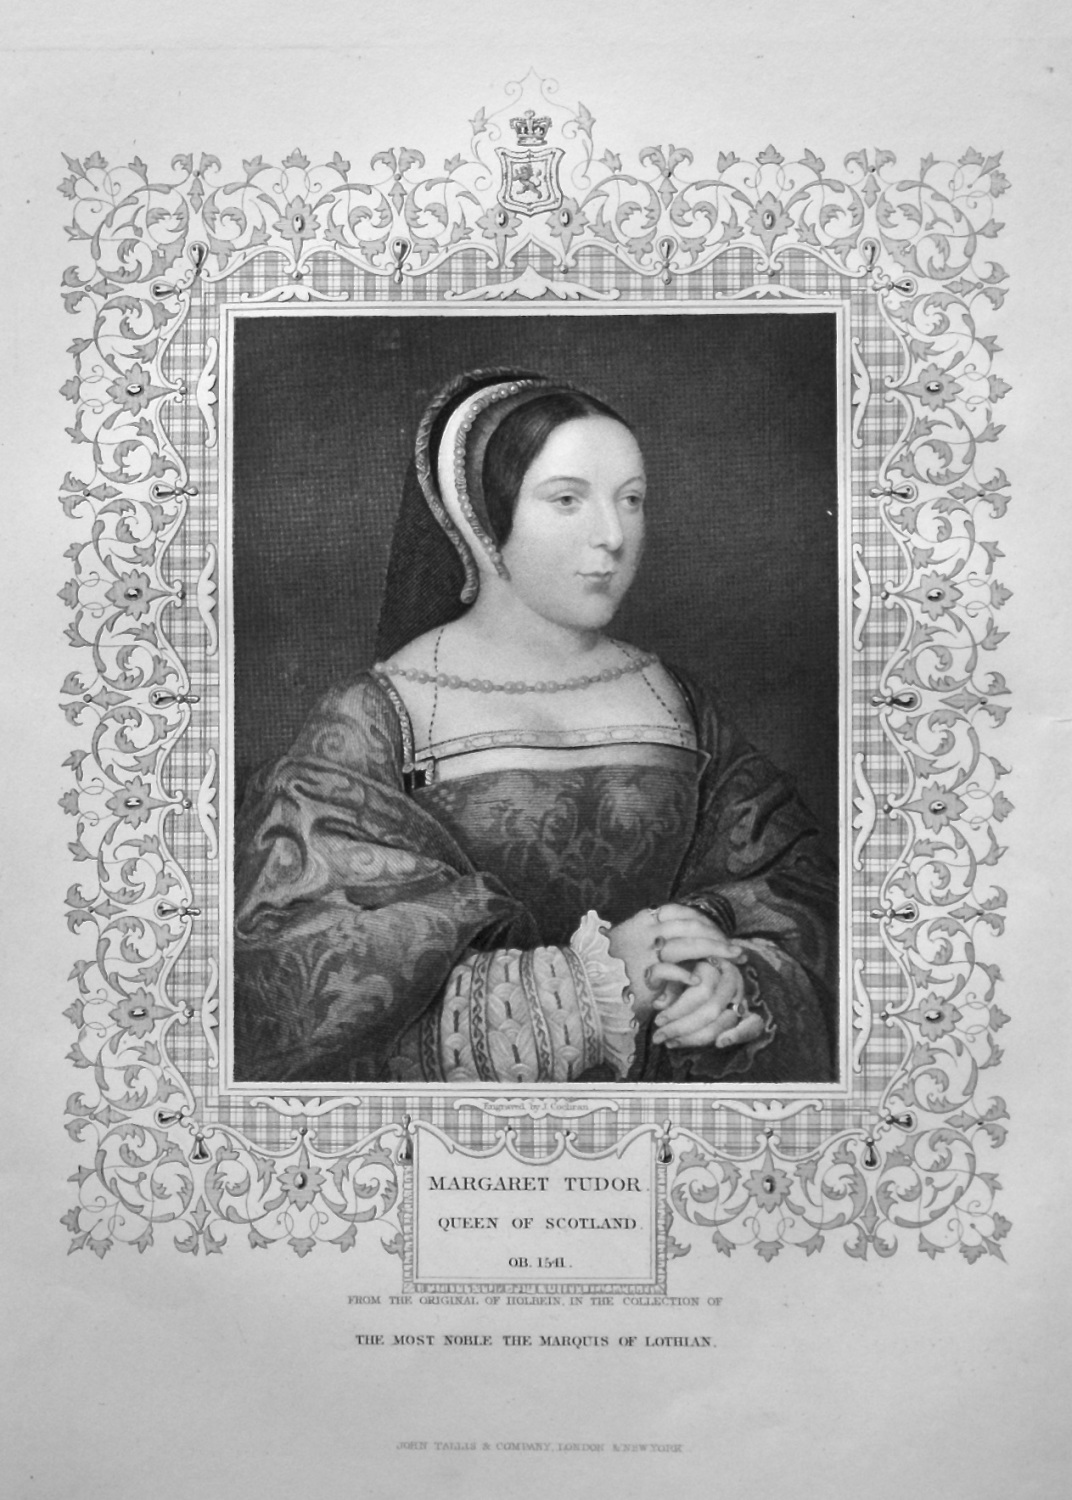 Margaret Tudor, Queen of Scotland.  OB. 1541.  From the original of Holbein